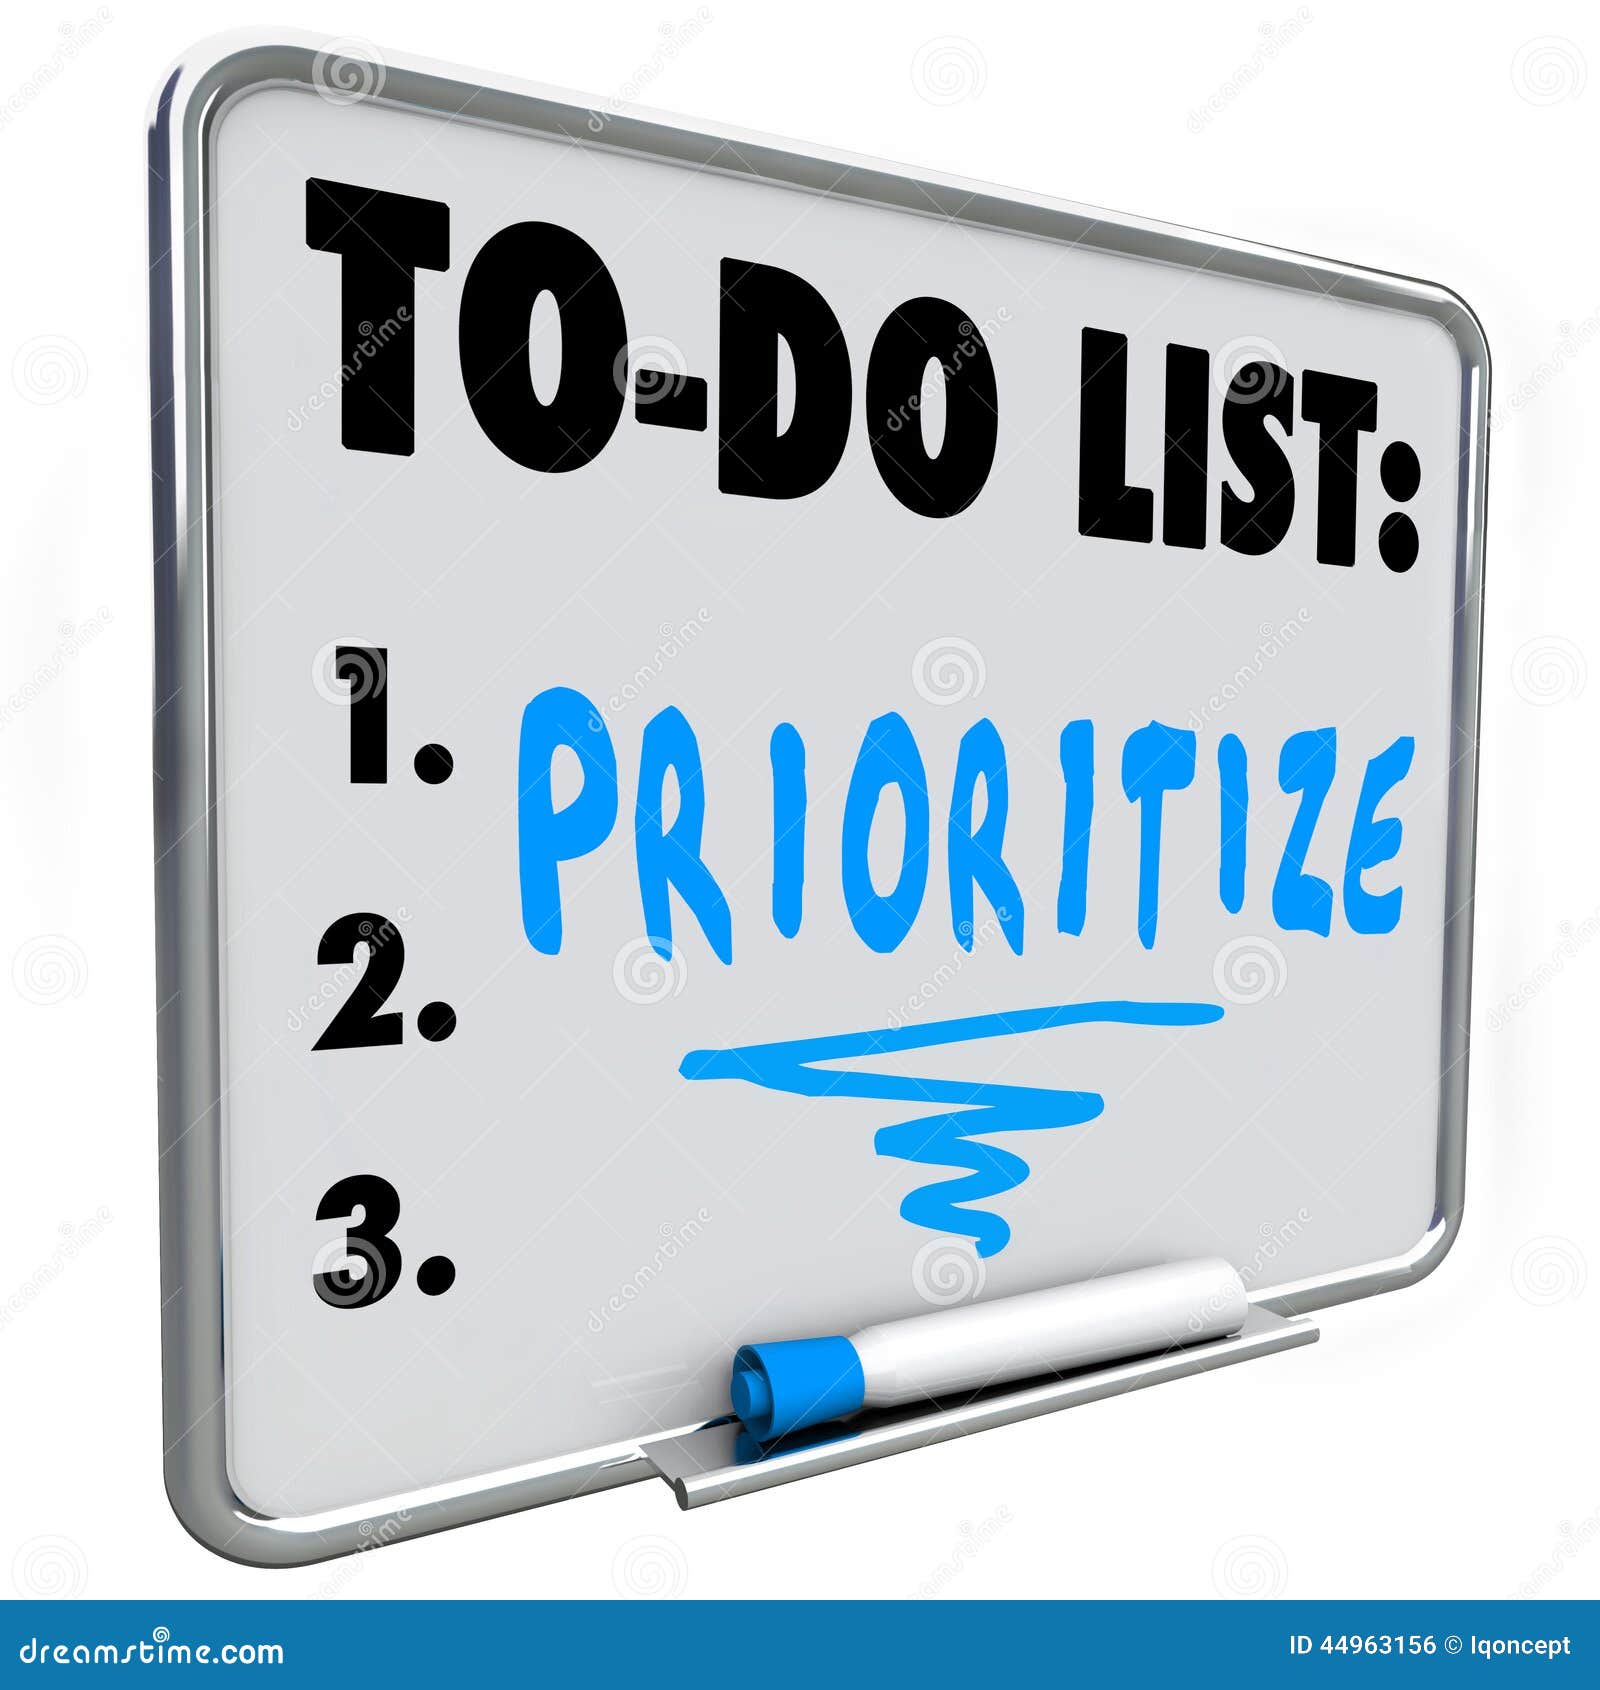 prioritize word to do list manage workload many tasks